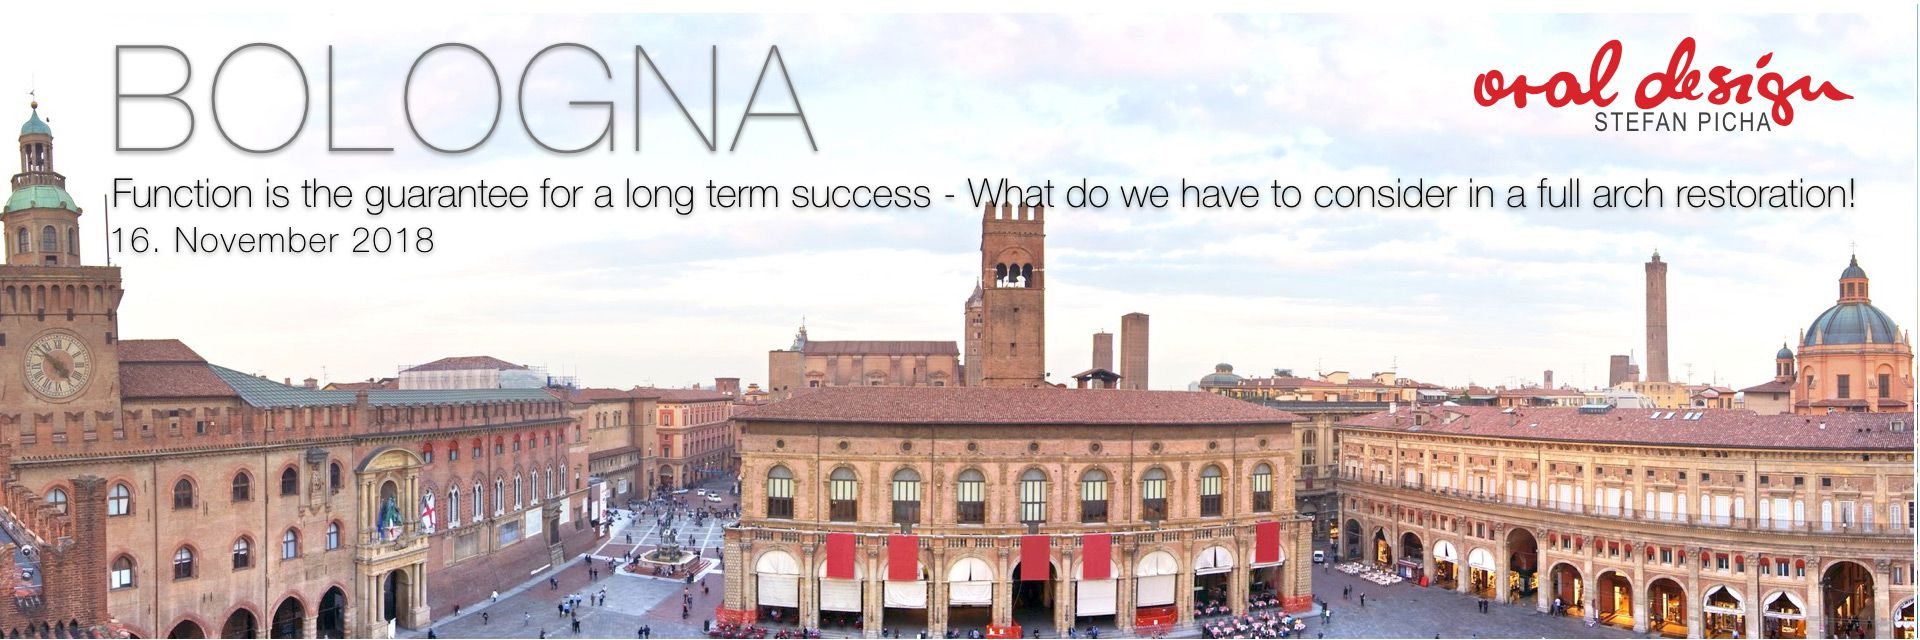 Function is the guarantee for long term success - Bologna